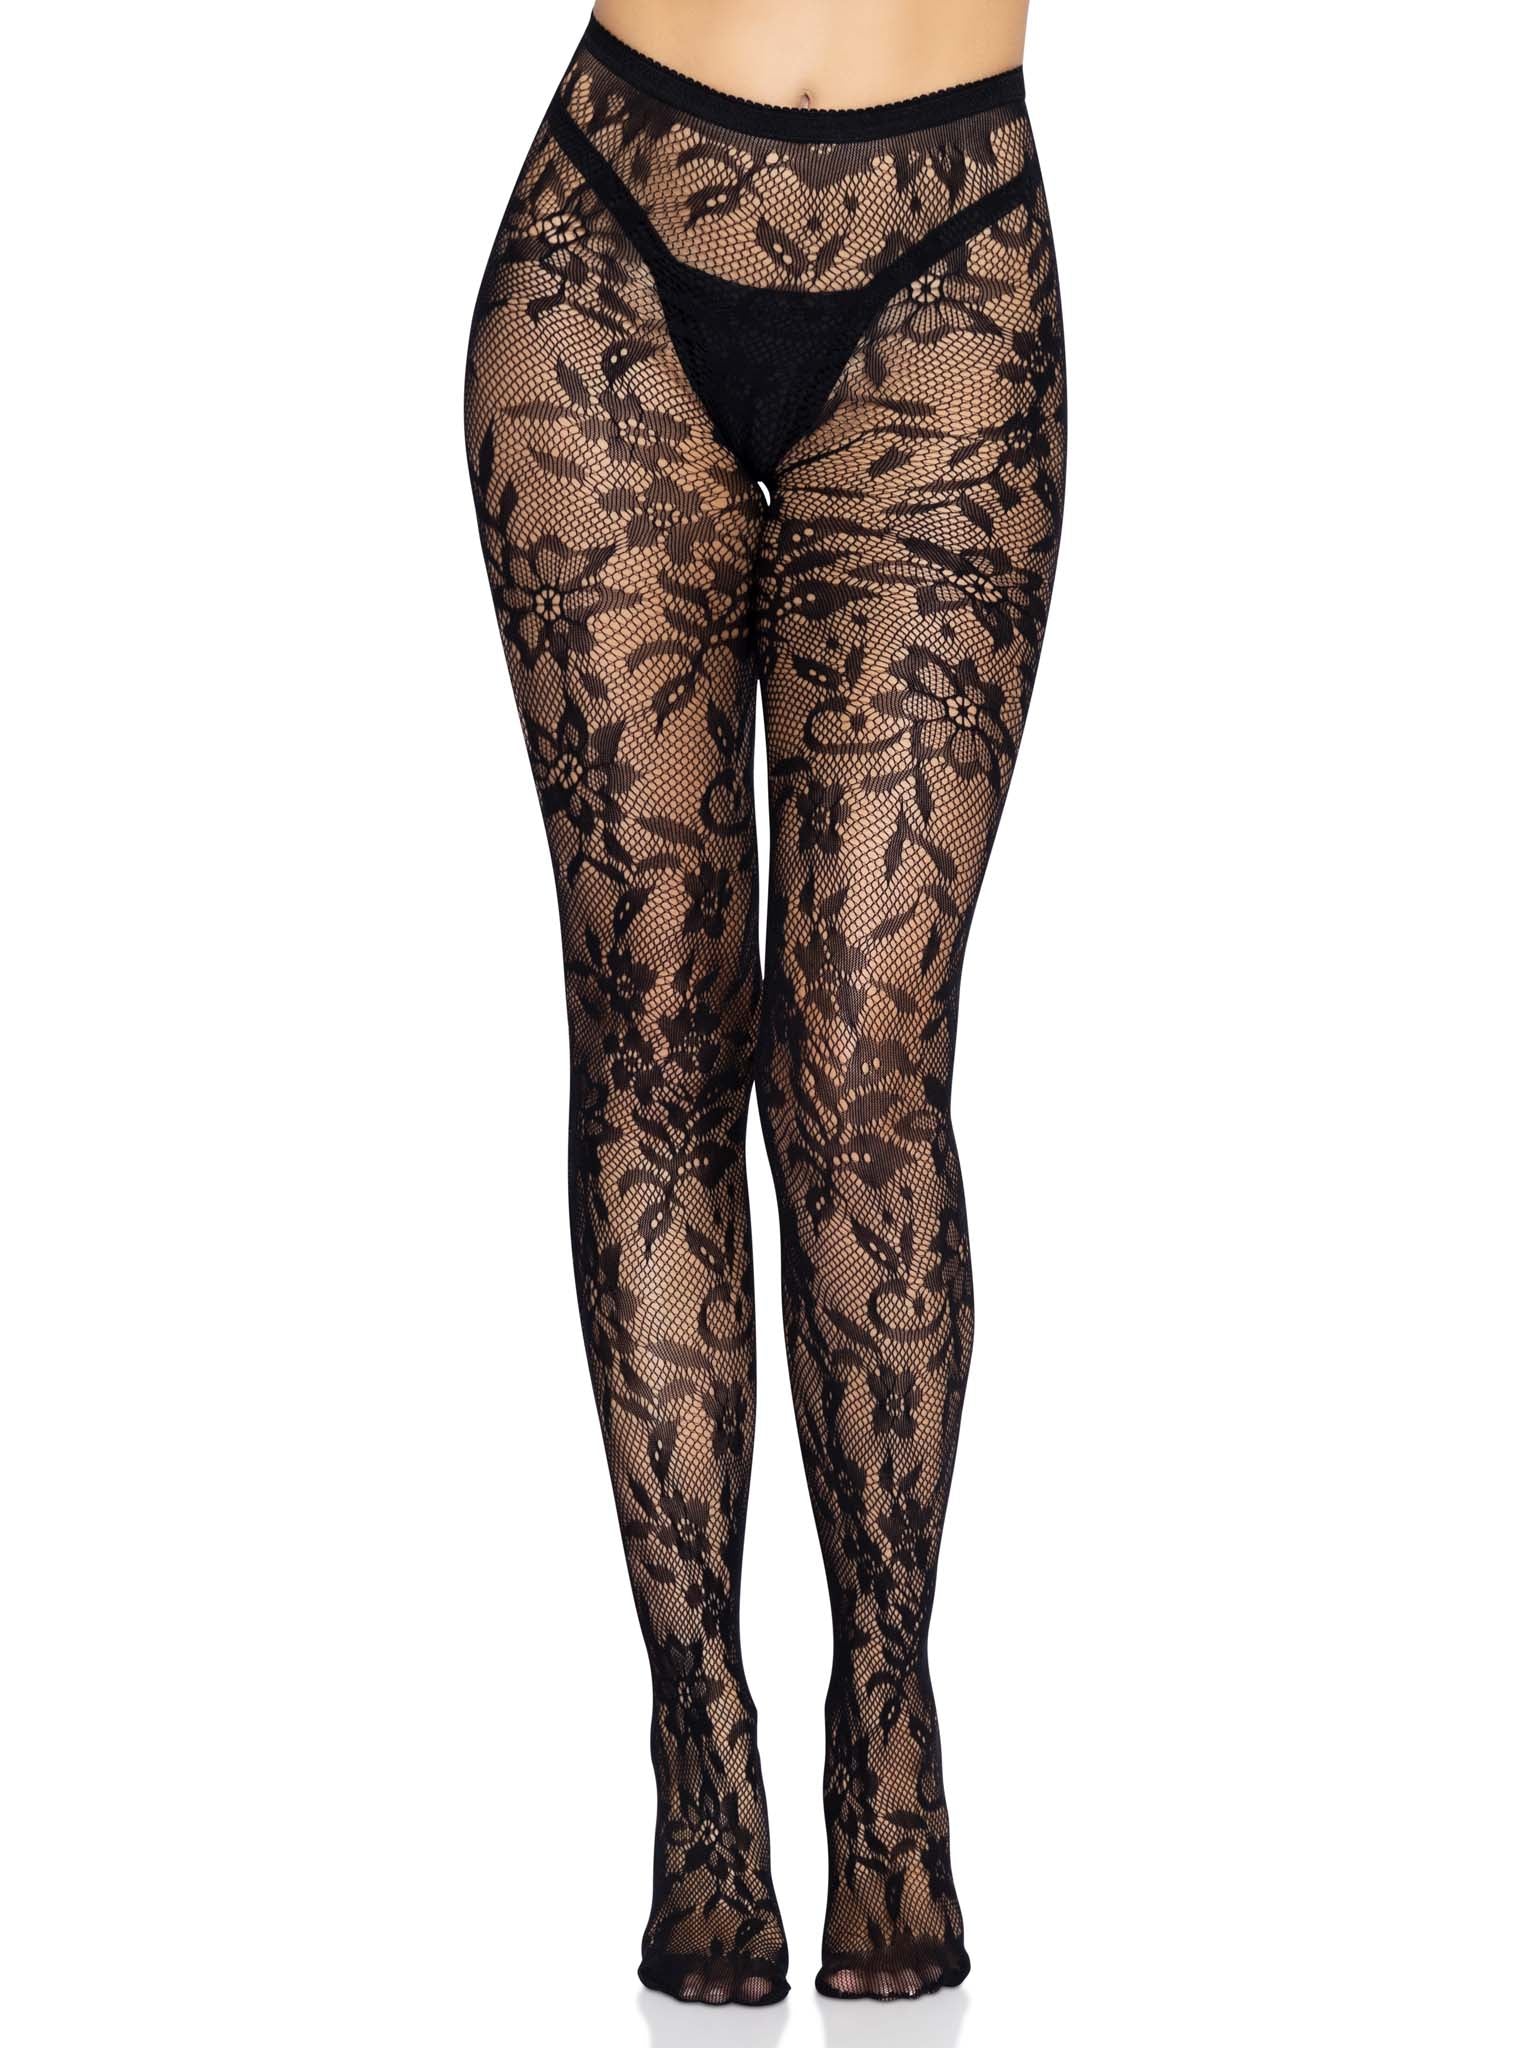 Seamless floral lace tights